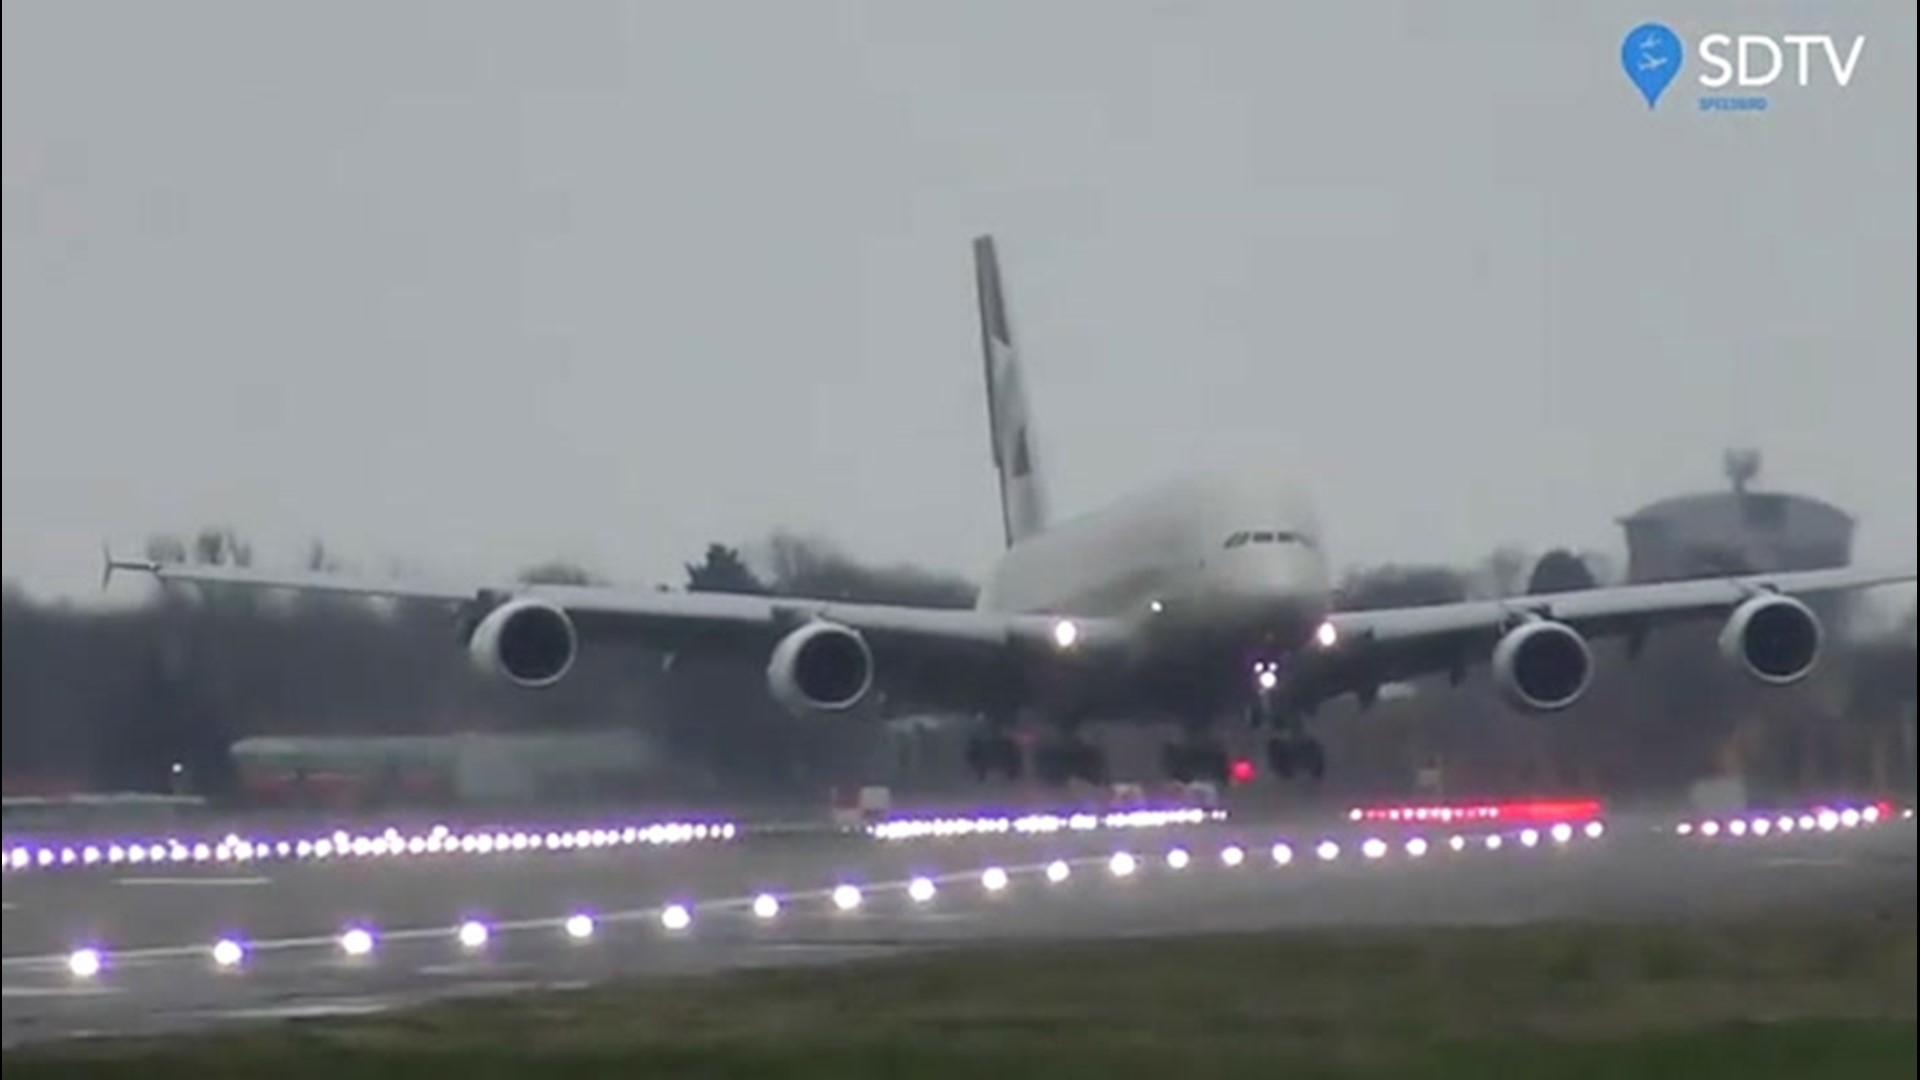 The pilot of the world's biggest passenger jet completed the daunting task of landing at London's Heathrow Airport against Storm Dennis' 91-mph winds on Feb. 15.